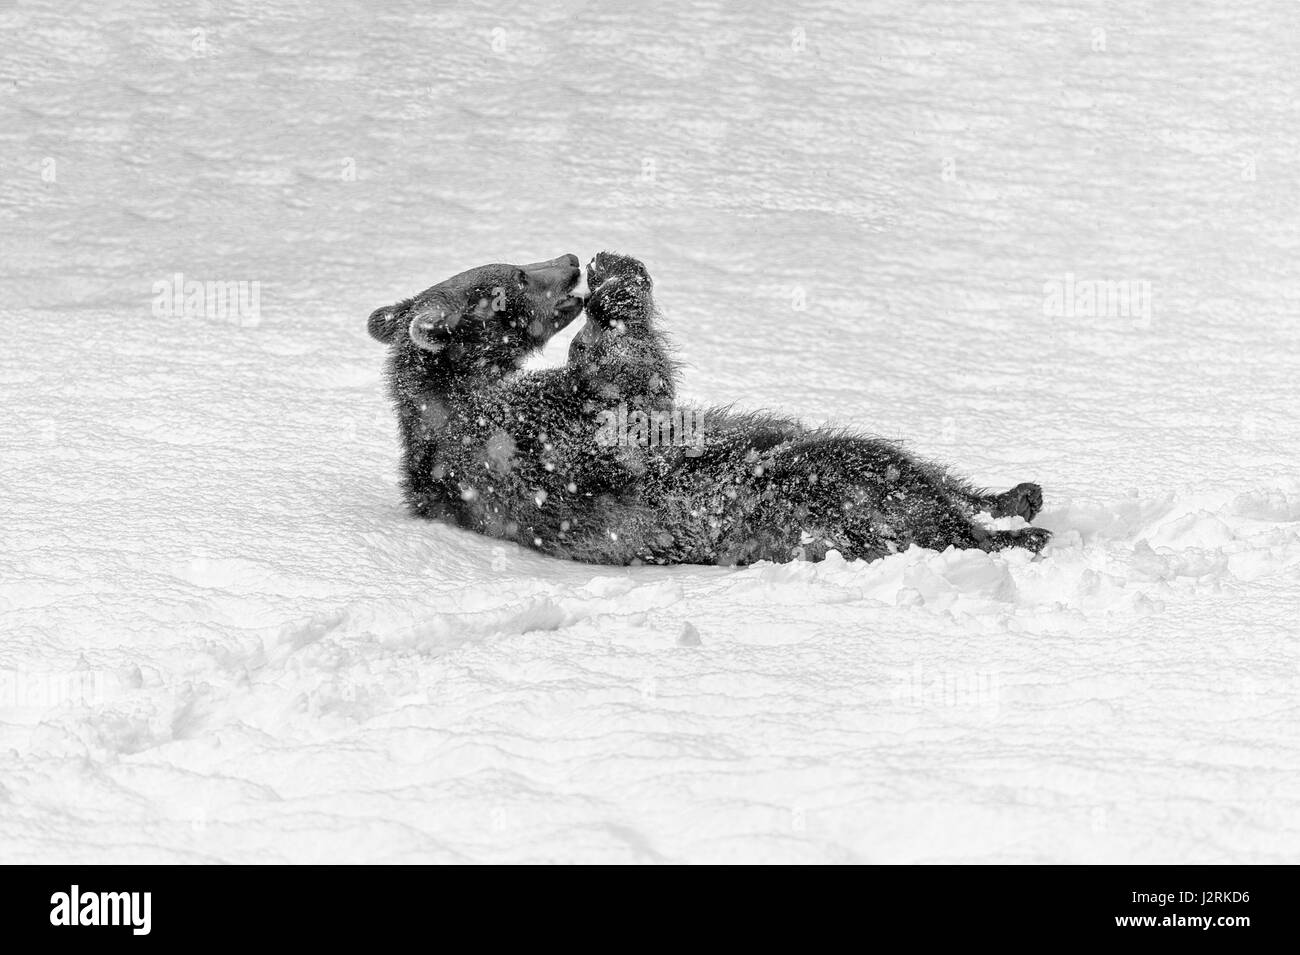 Single Eurasian Brown Bear Cub (Ursus arctos) frolicking in a winter snow storm. (Fine Art, High Key, Black and White) Stock Photo